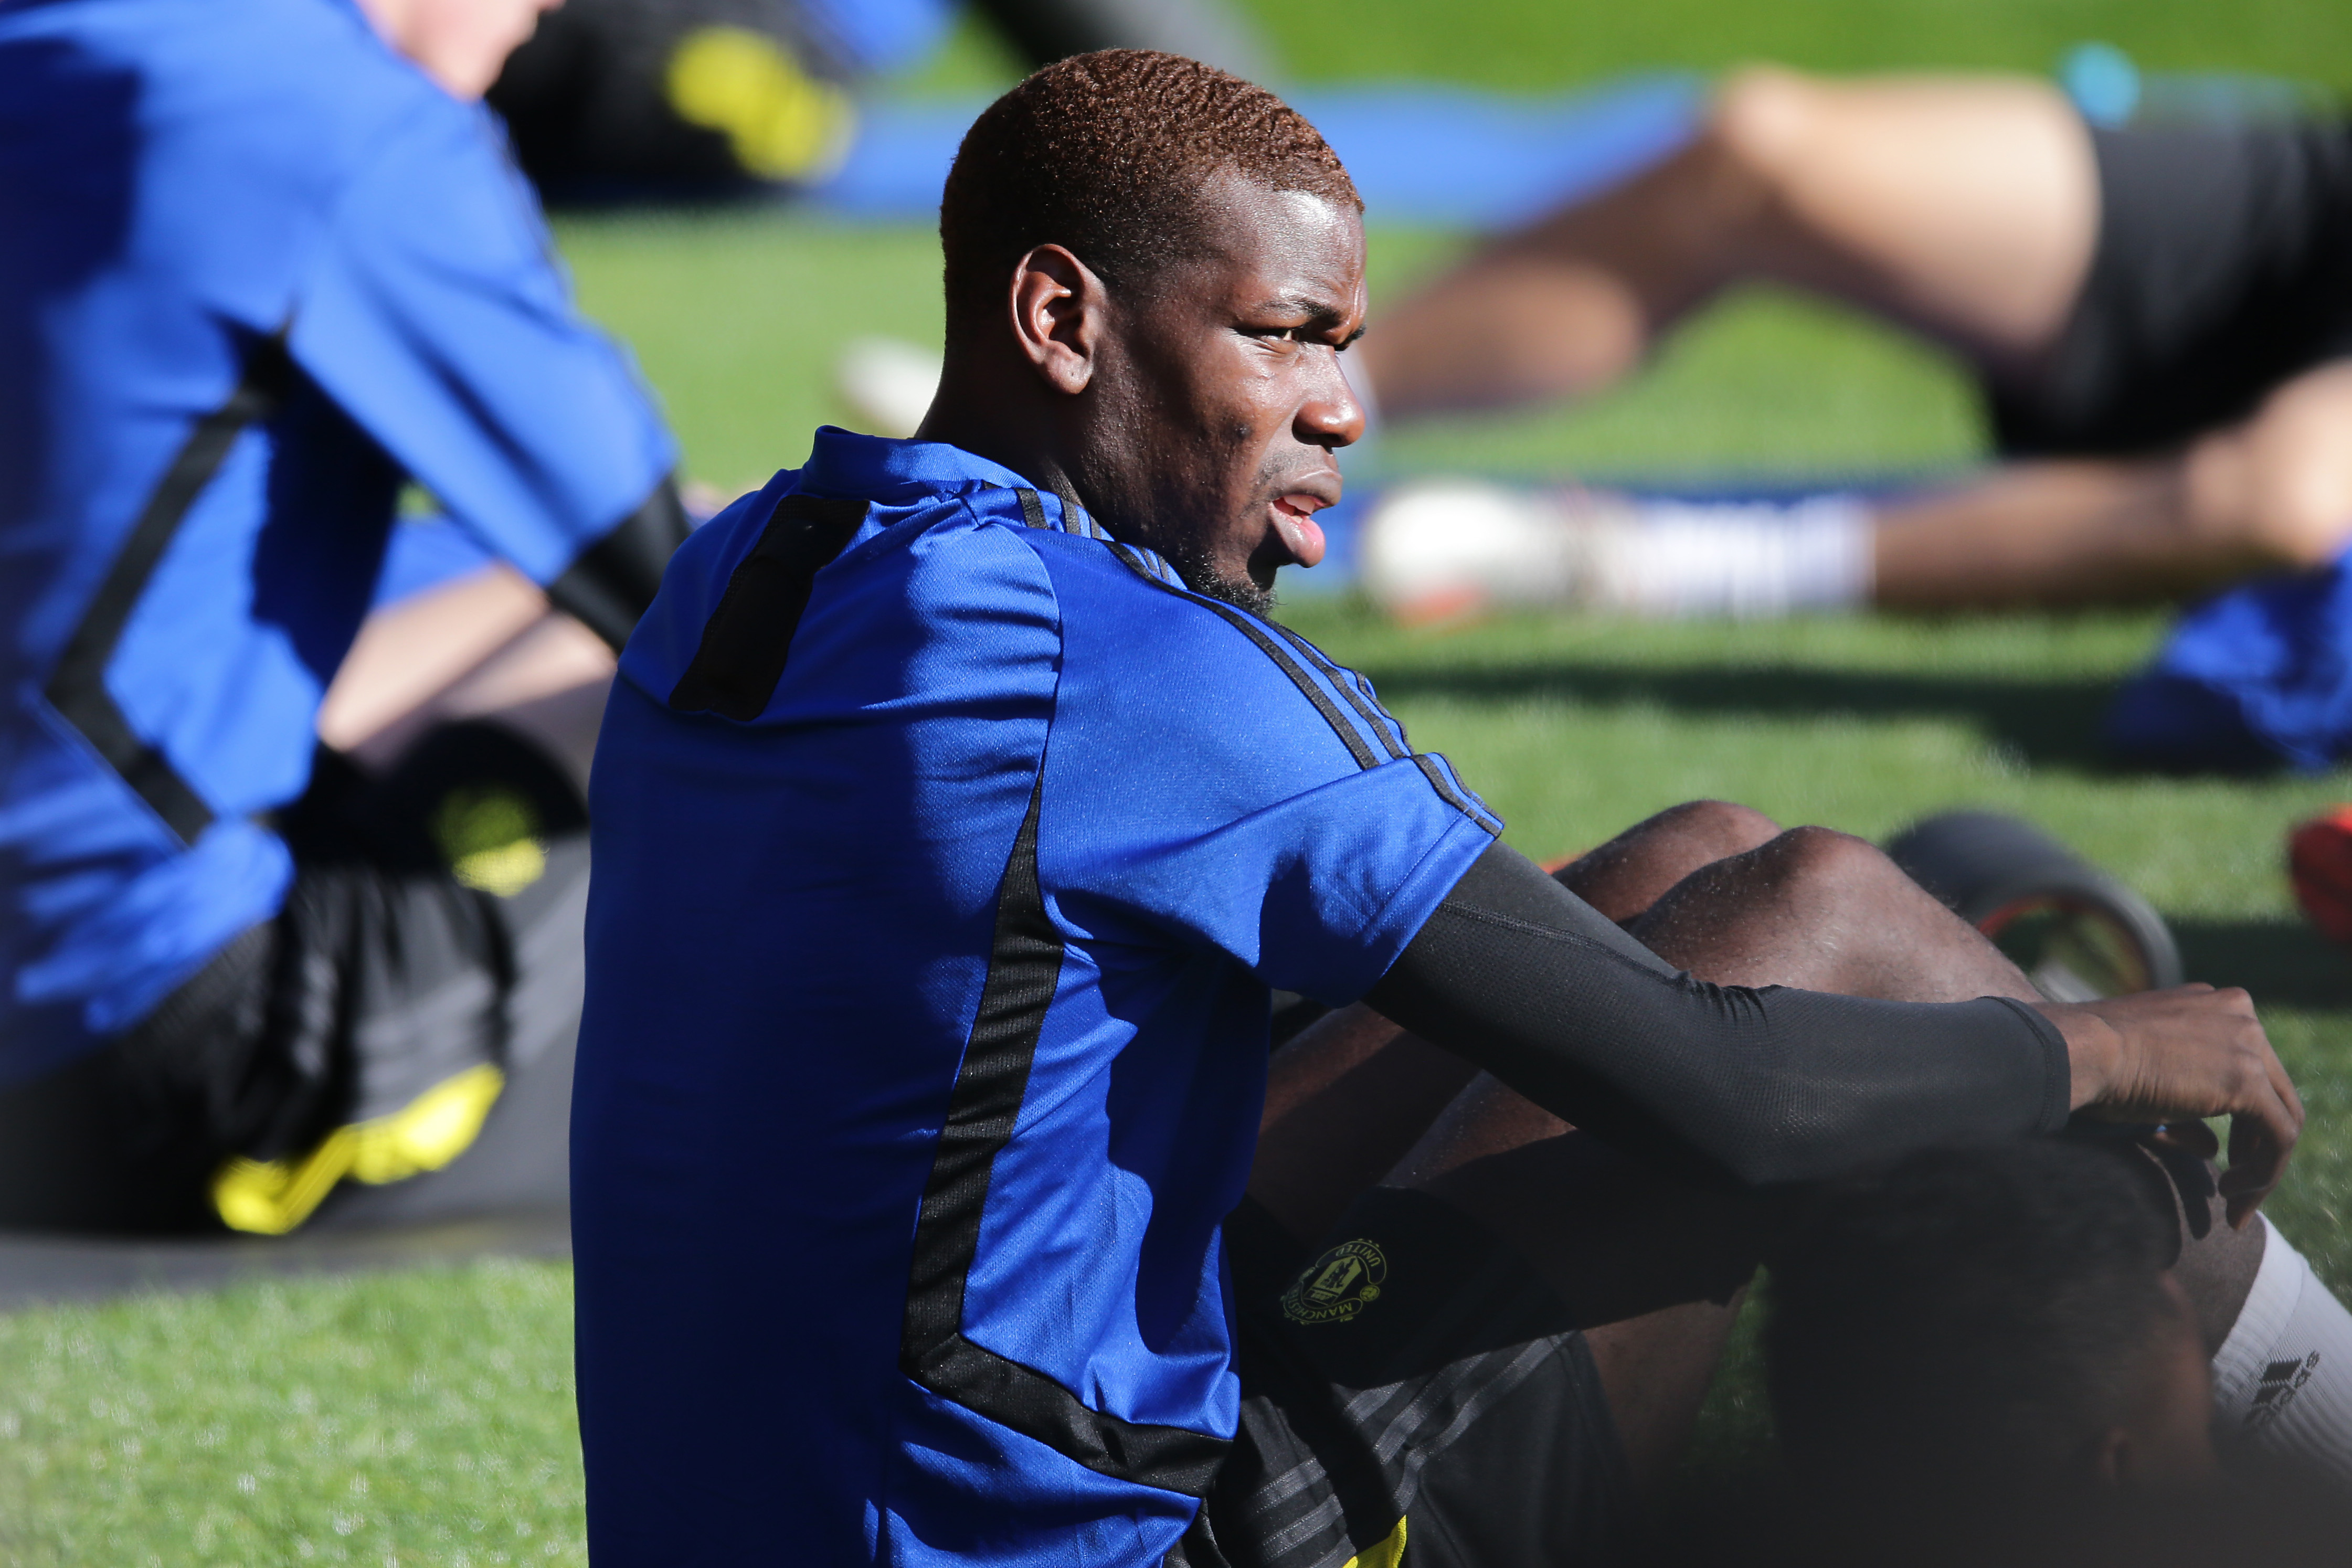 PERTH, AUSTRALIA - JULY 09: Paul Pogba of Manchester United during a Manchester United training session at WACA on July 09, 2019 in Perth, Australia. (Photo by Will Russell/Getty Images)